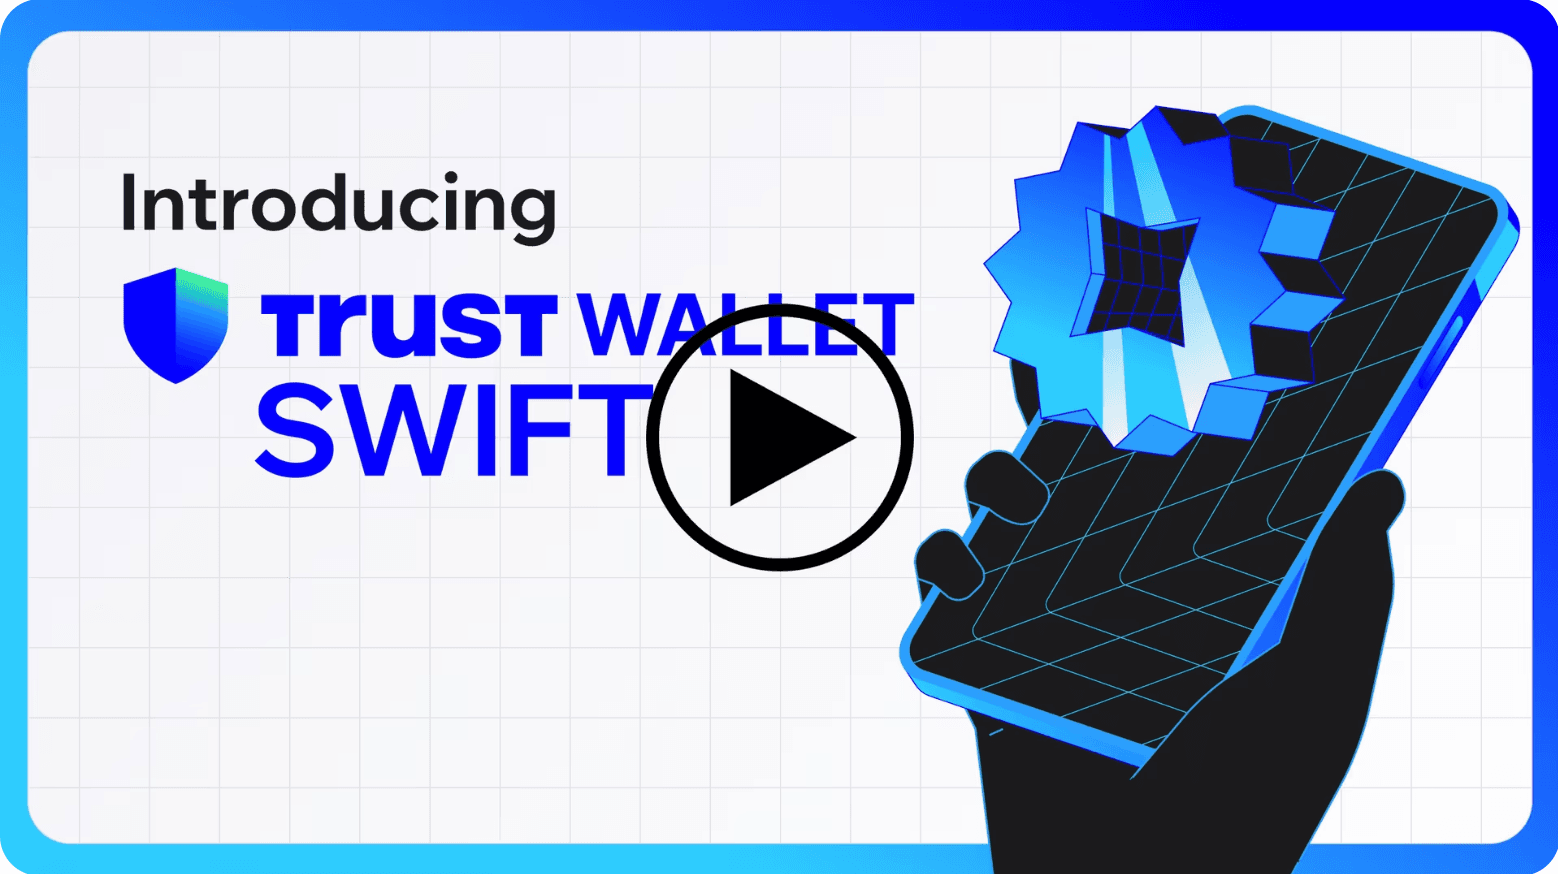 Introducing-Trust-Wallet-SWIFT-The-Easiest-Way-to-Start-Exploring-Web3-Trust.png